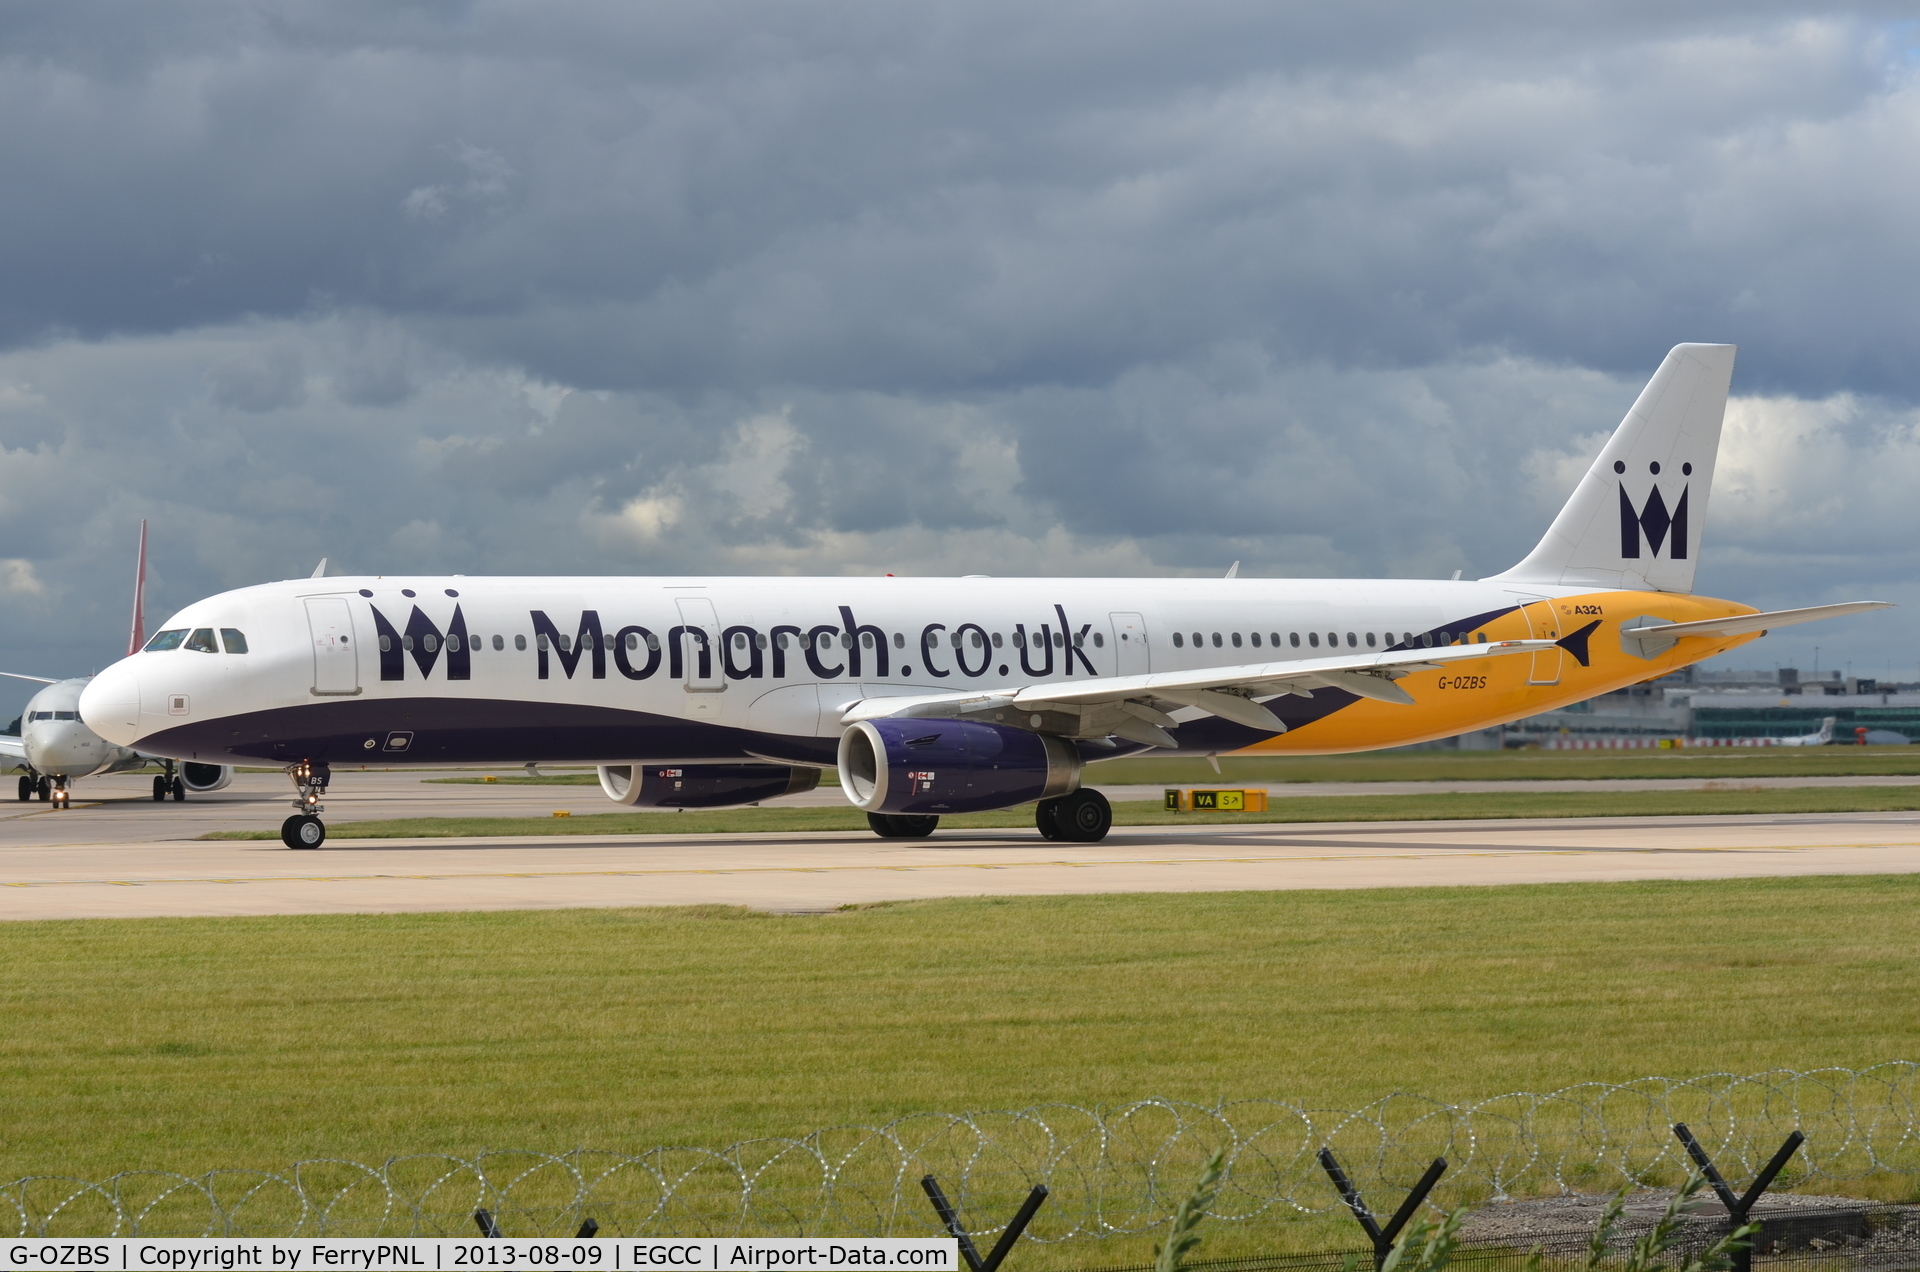 G-OZBS, 2001 Airbus A321-231 C/N 1428, Monarch A321 about to take-off.